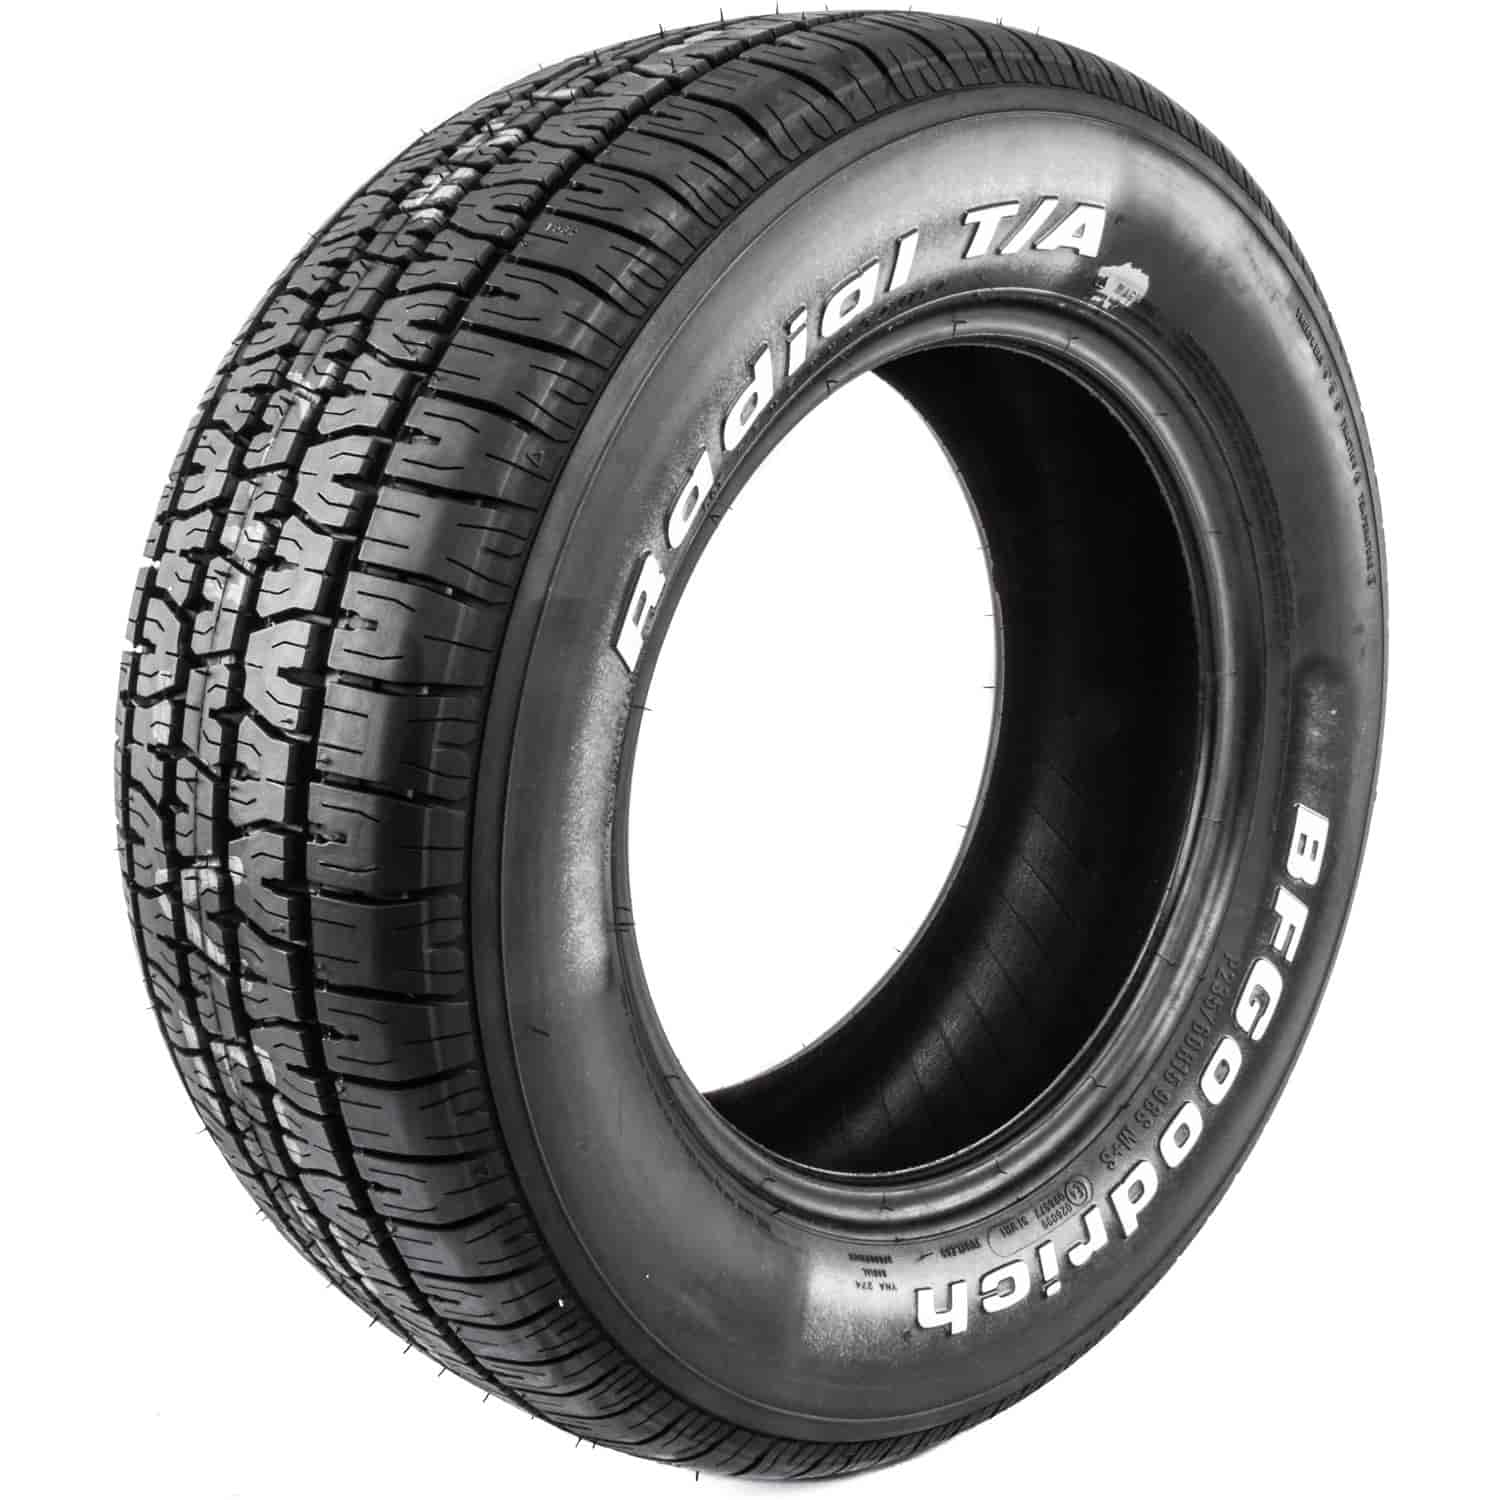 Radial T/A Tire P235/60SR15